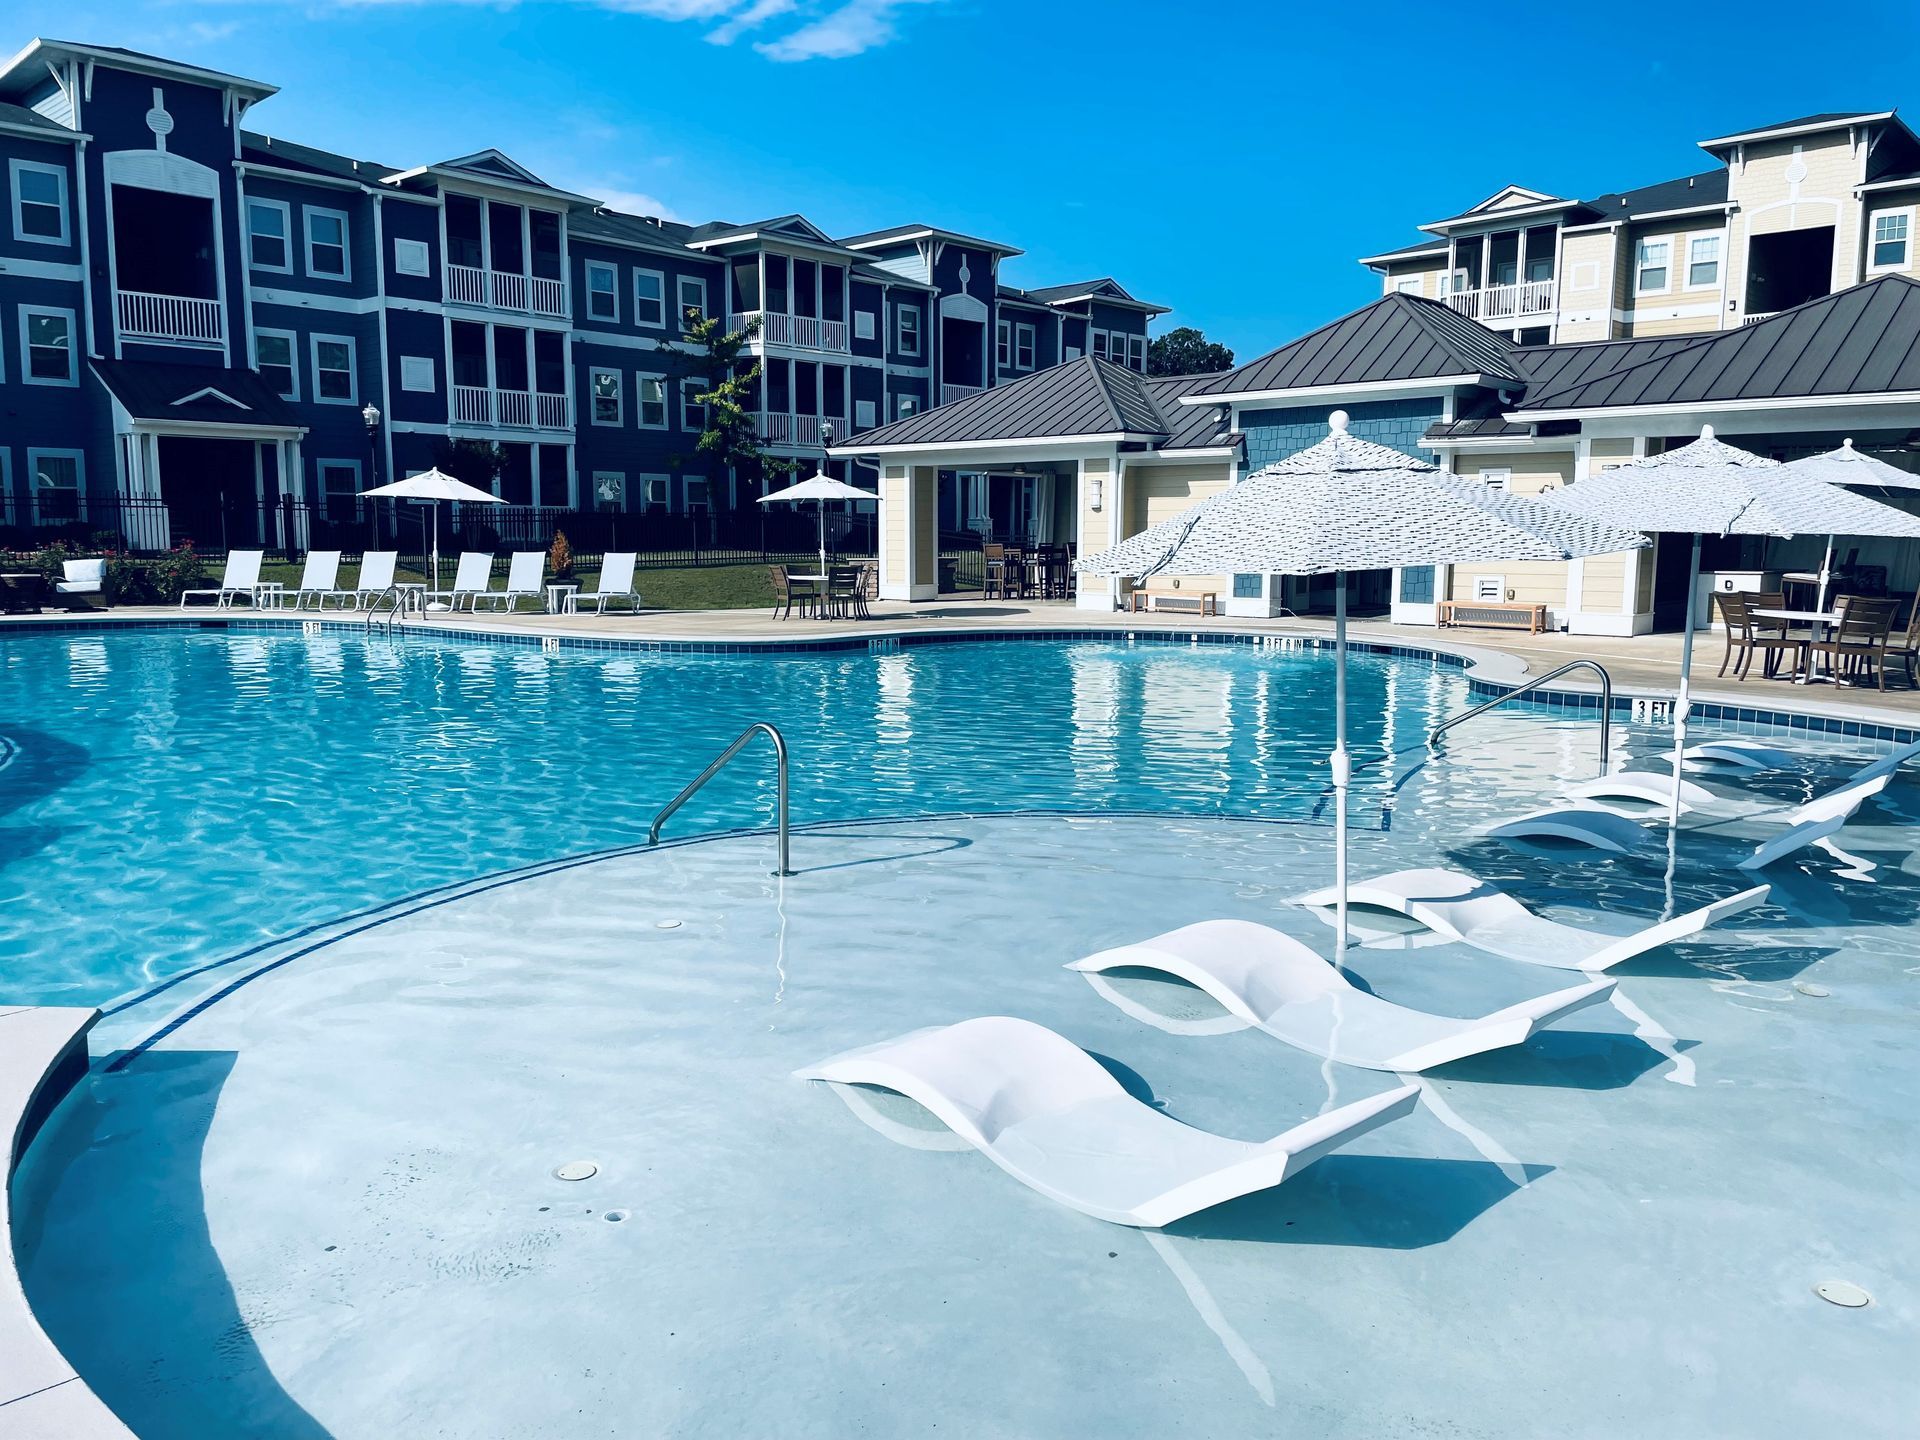 A large swimming pool with chairs and umbrellas in front of a building at Thomaston Crossing.